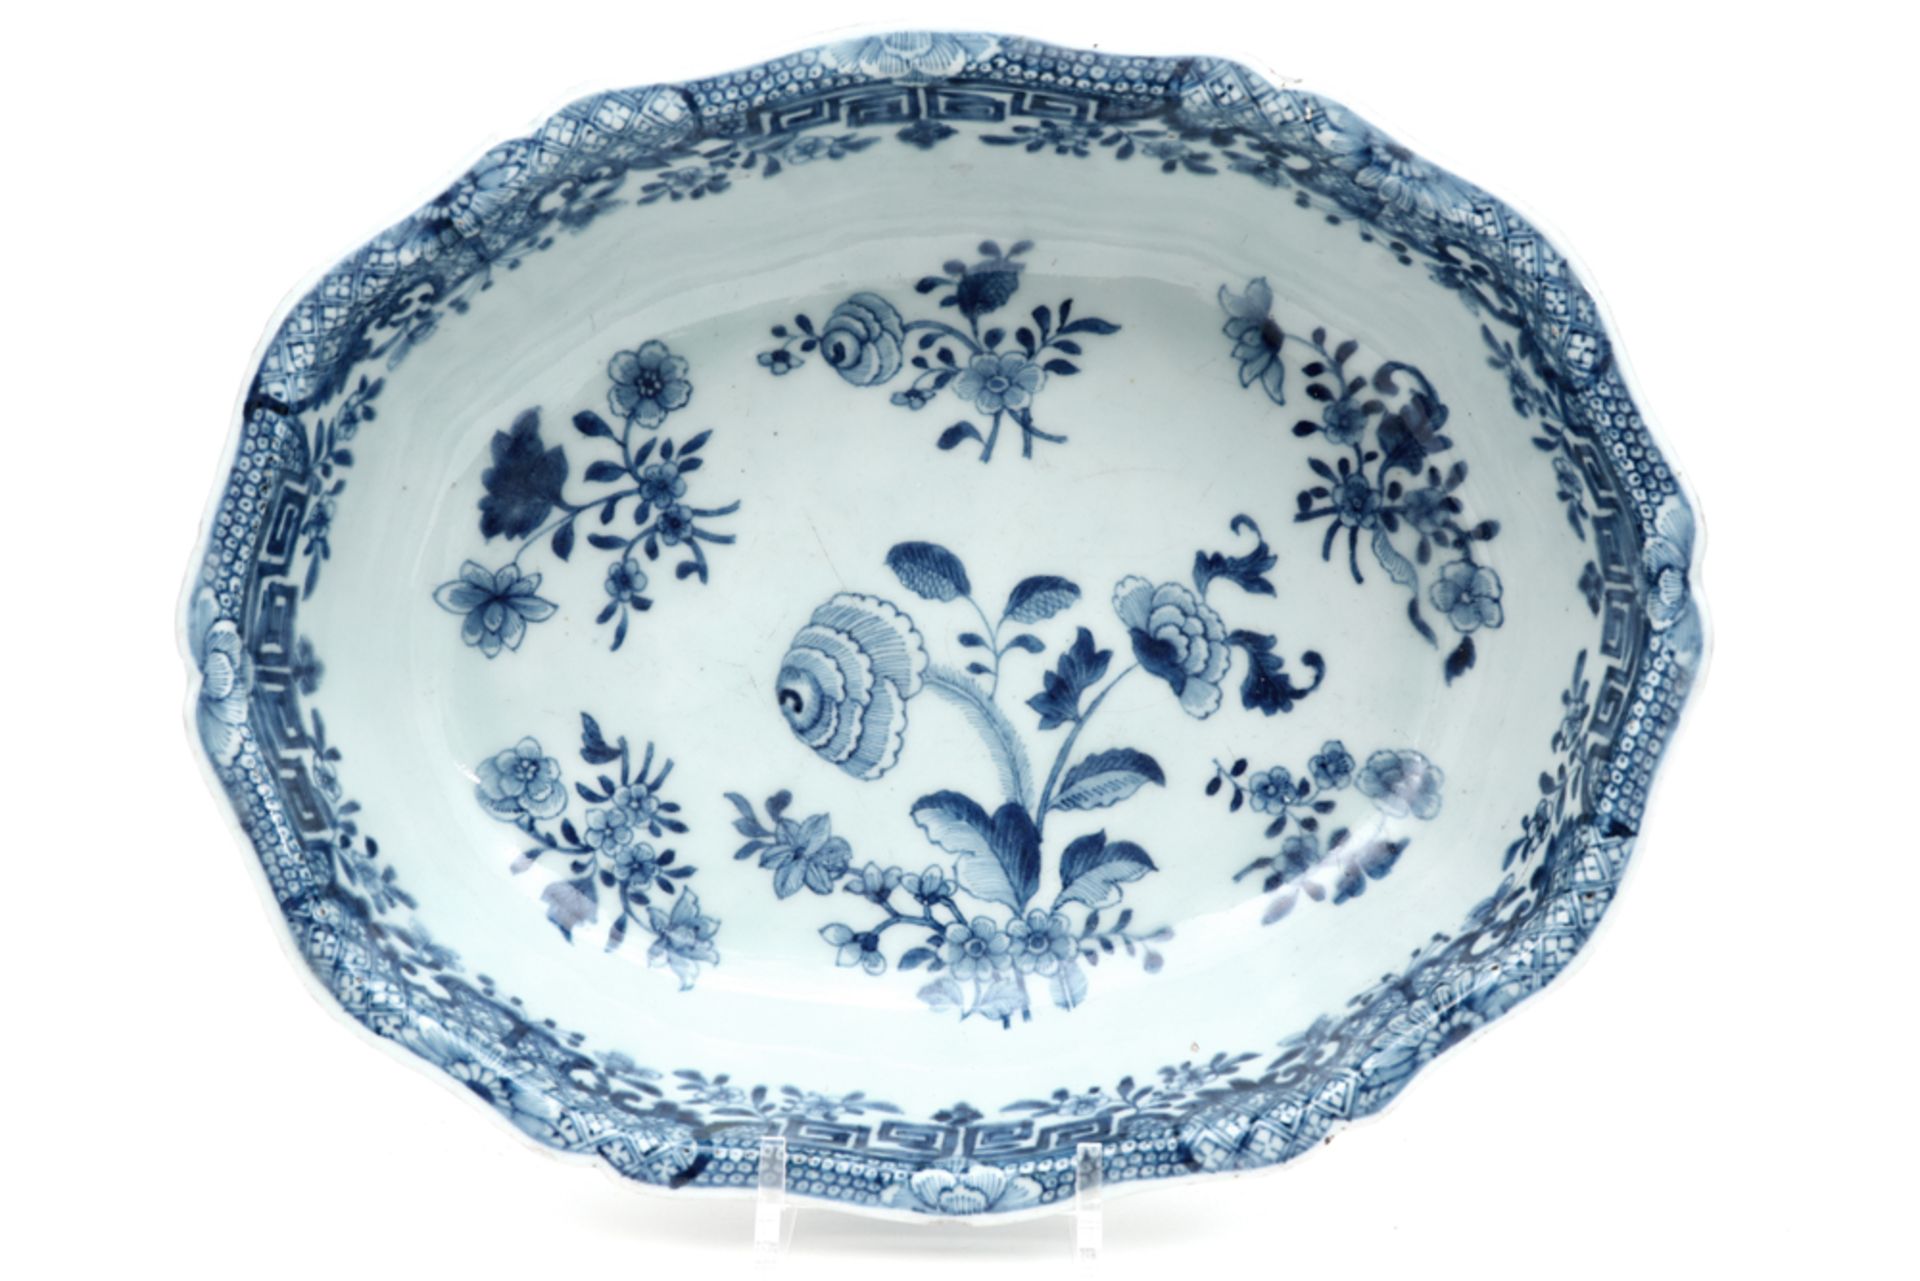 oval 18th Cent. Chinese dish in porcelain with a blue-white flowers decor || Ovale achttiende eeuwse